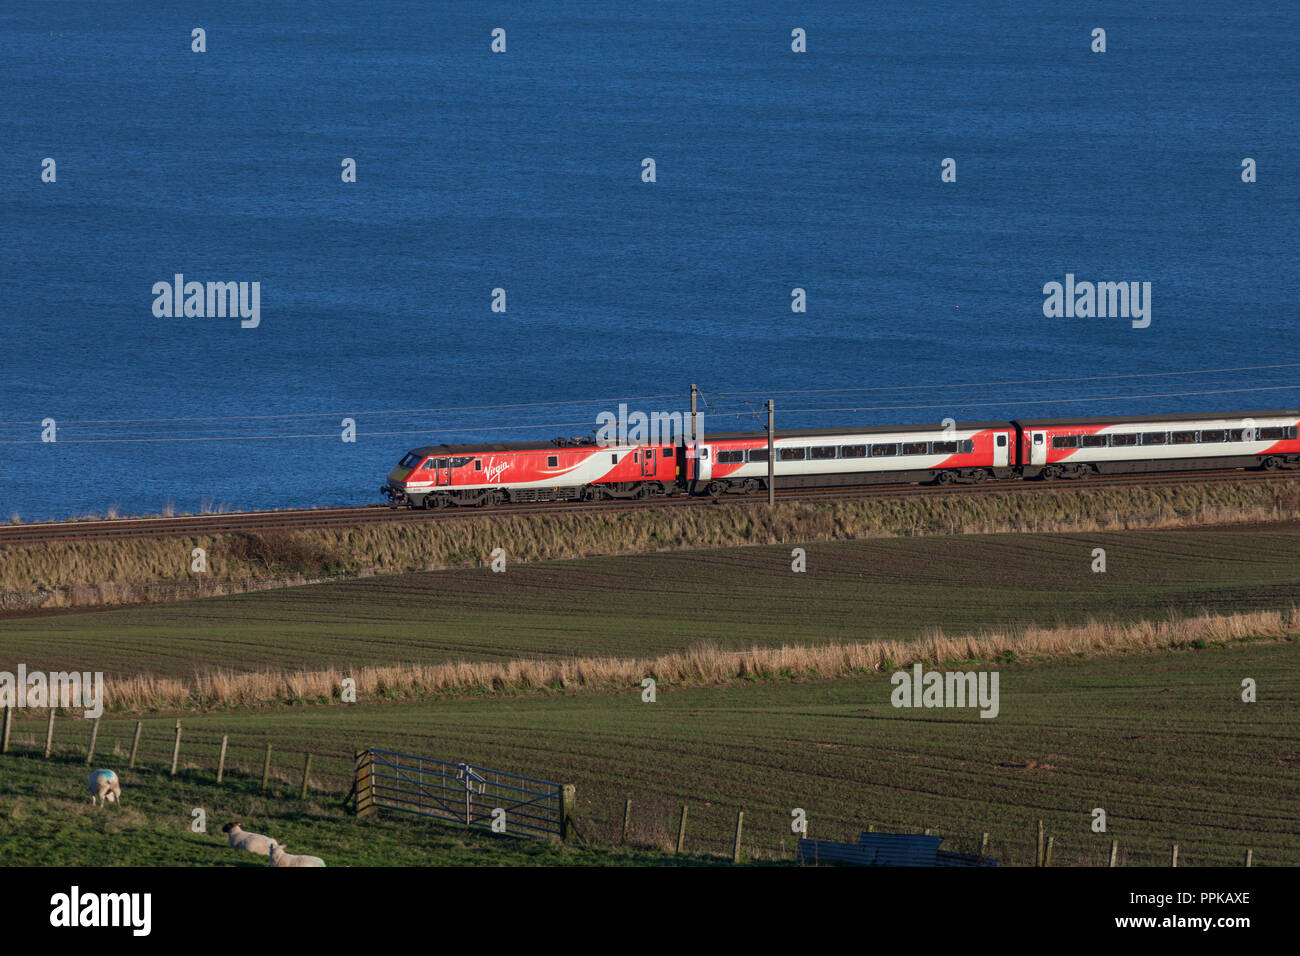 A Virgin Trains east Cast class 91 electric locomotive at Marshall meadows, about to cross the England / Scotland border on the east coast main line Stock Photo